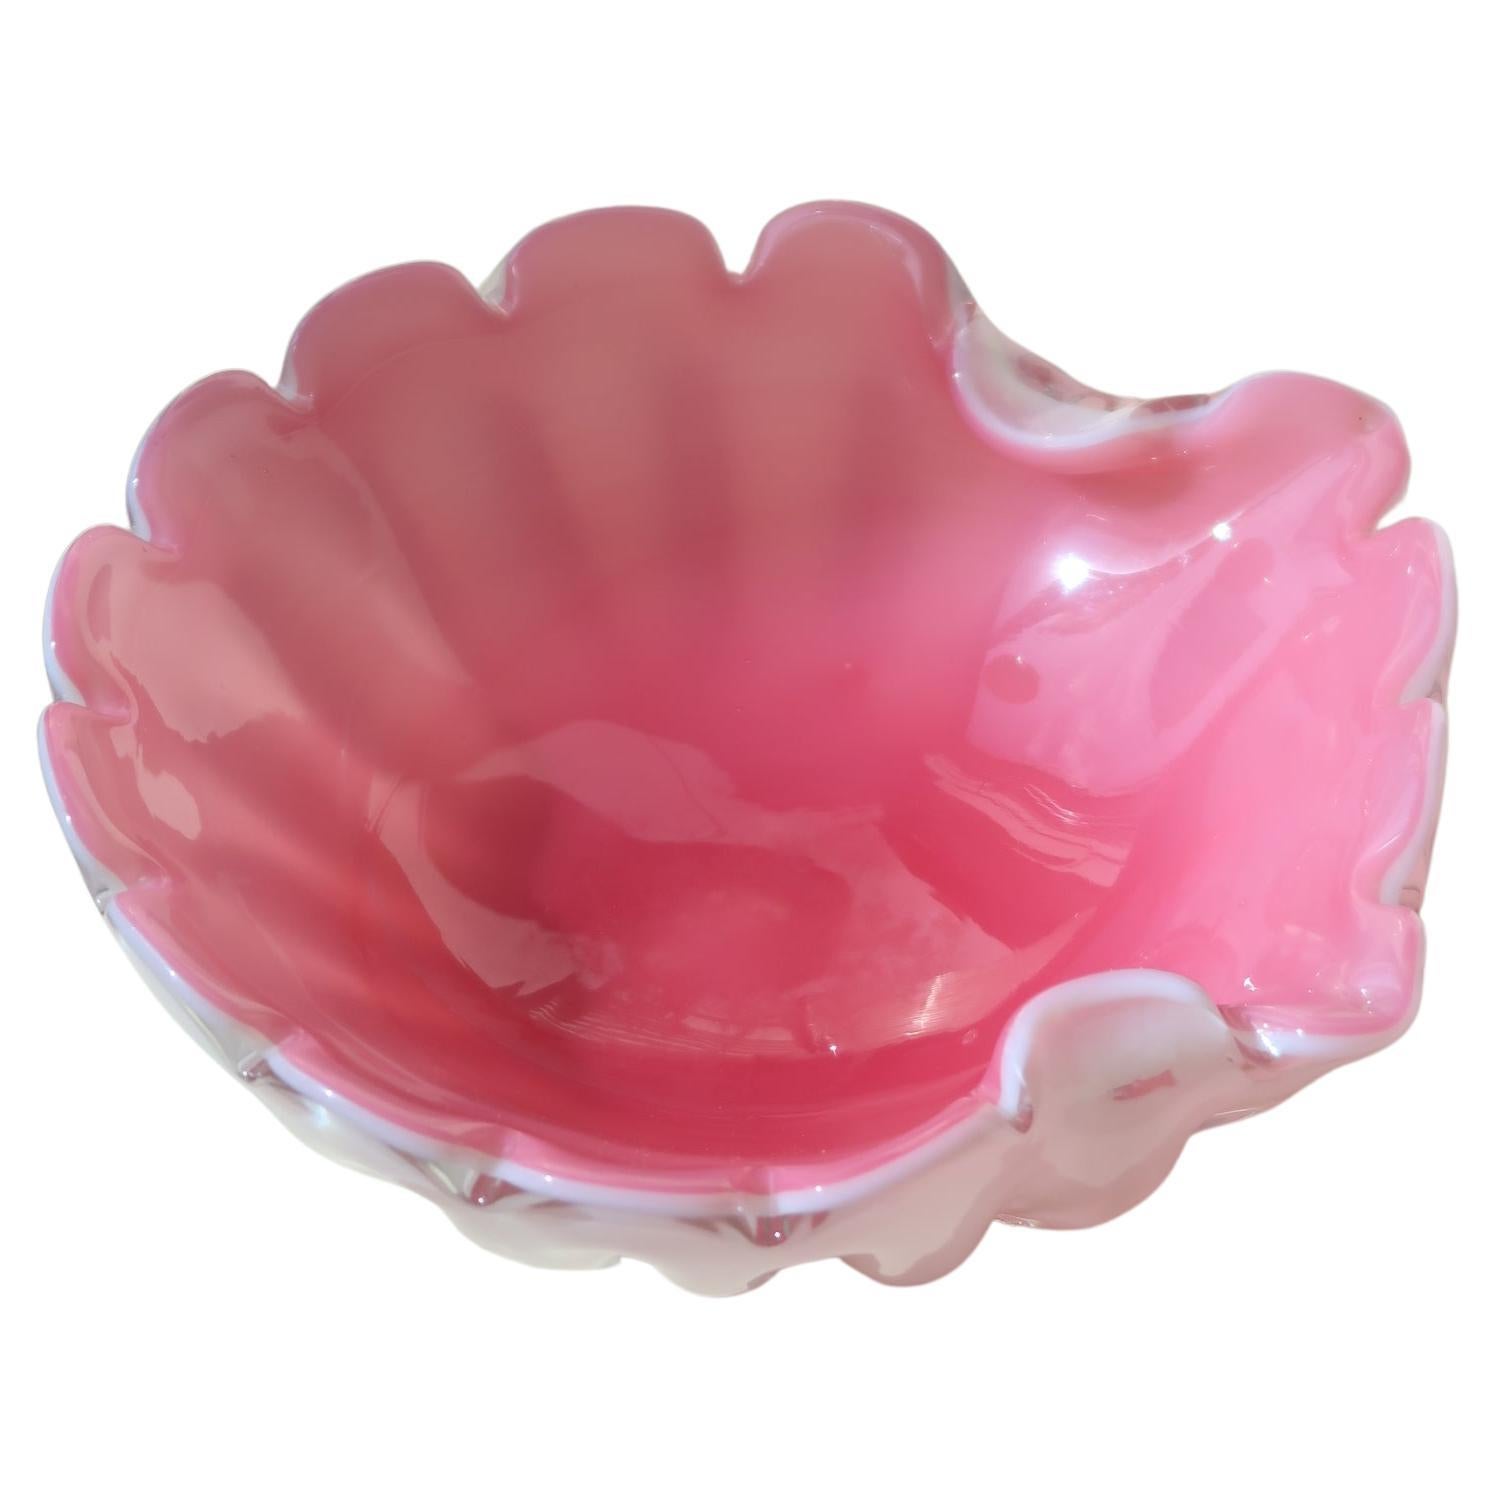 Vintage Murano Pink Opal Shell Clam Bowl Mouth Blown Glass For Sale